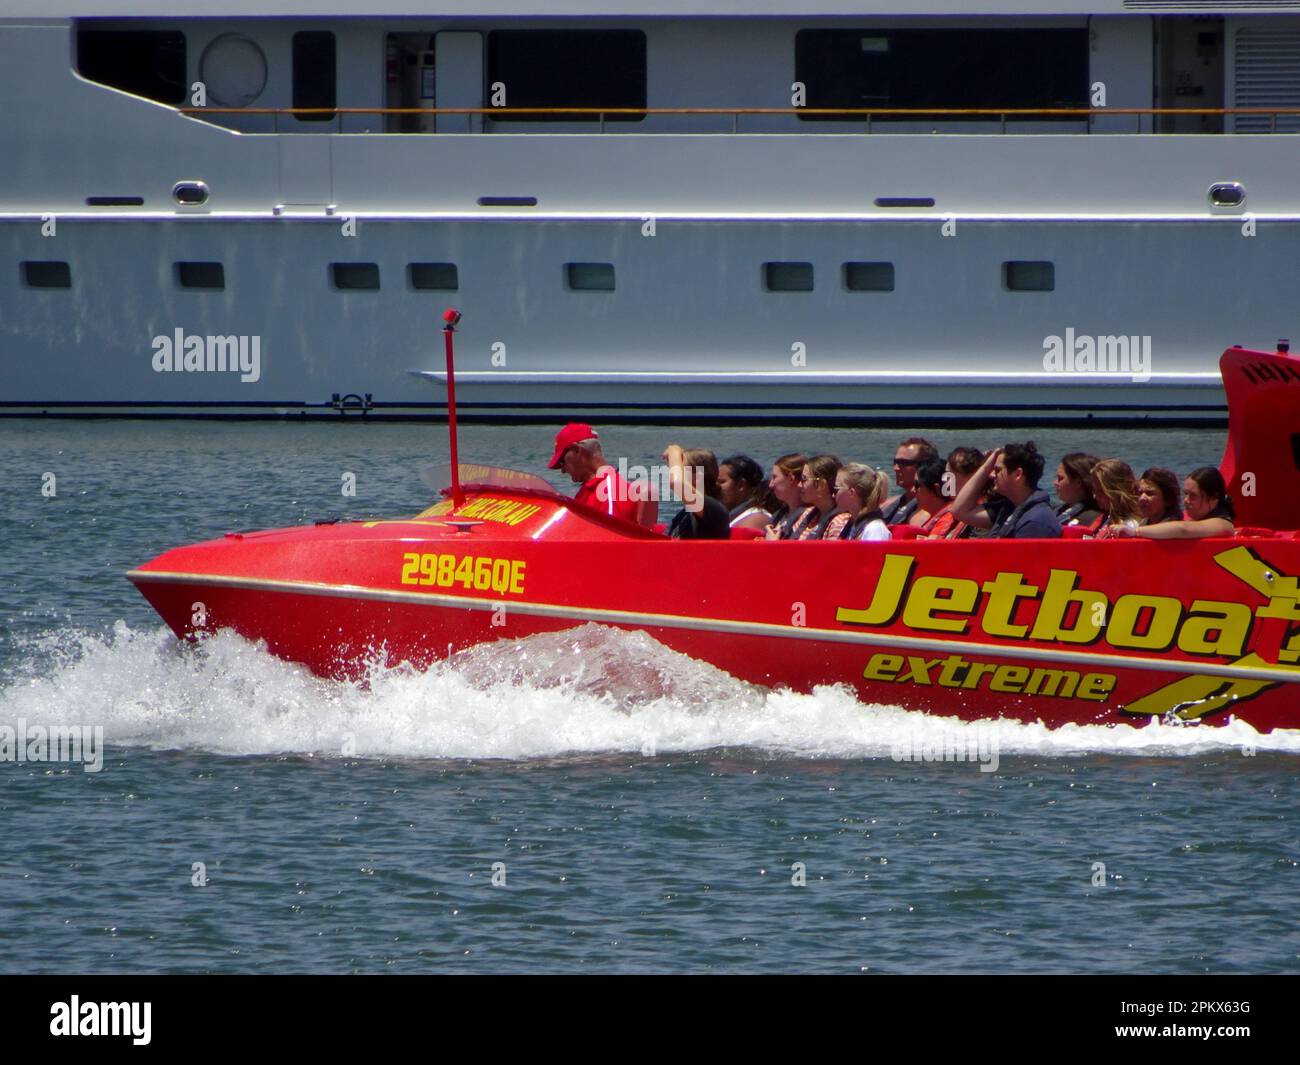 Thrill ride of Jetboat full of tourists on the Broadwater, Southport, Gold Coast, Australia. Red boat powered by 650 horse-power jet engine. Stock Photo